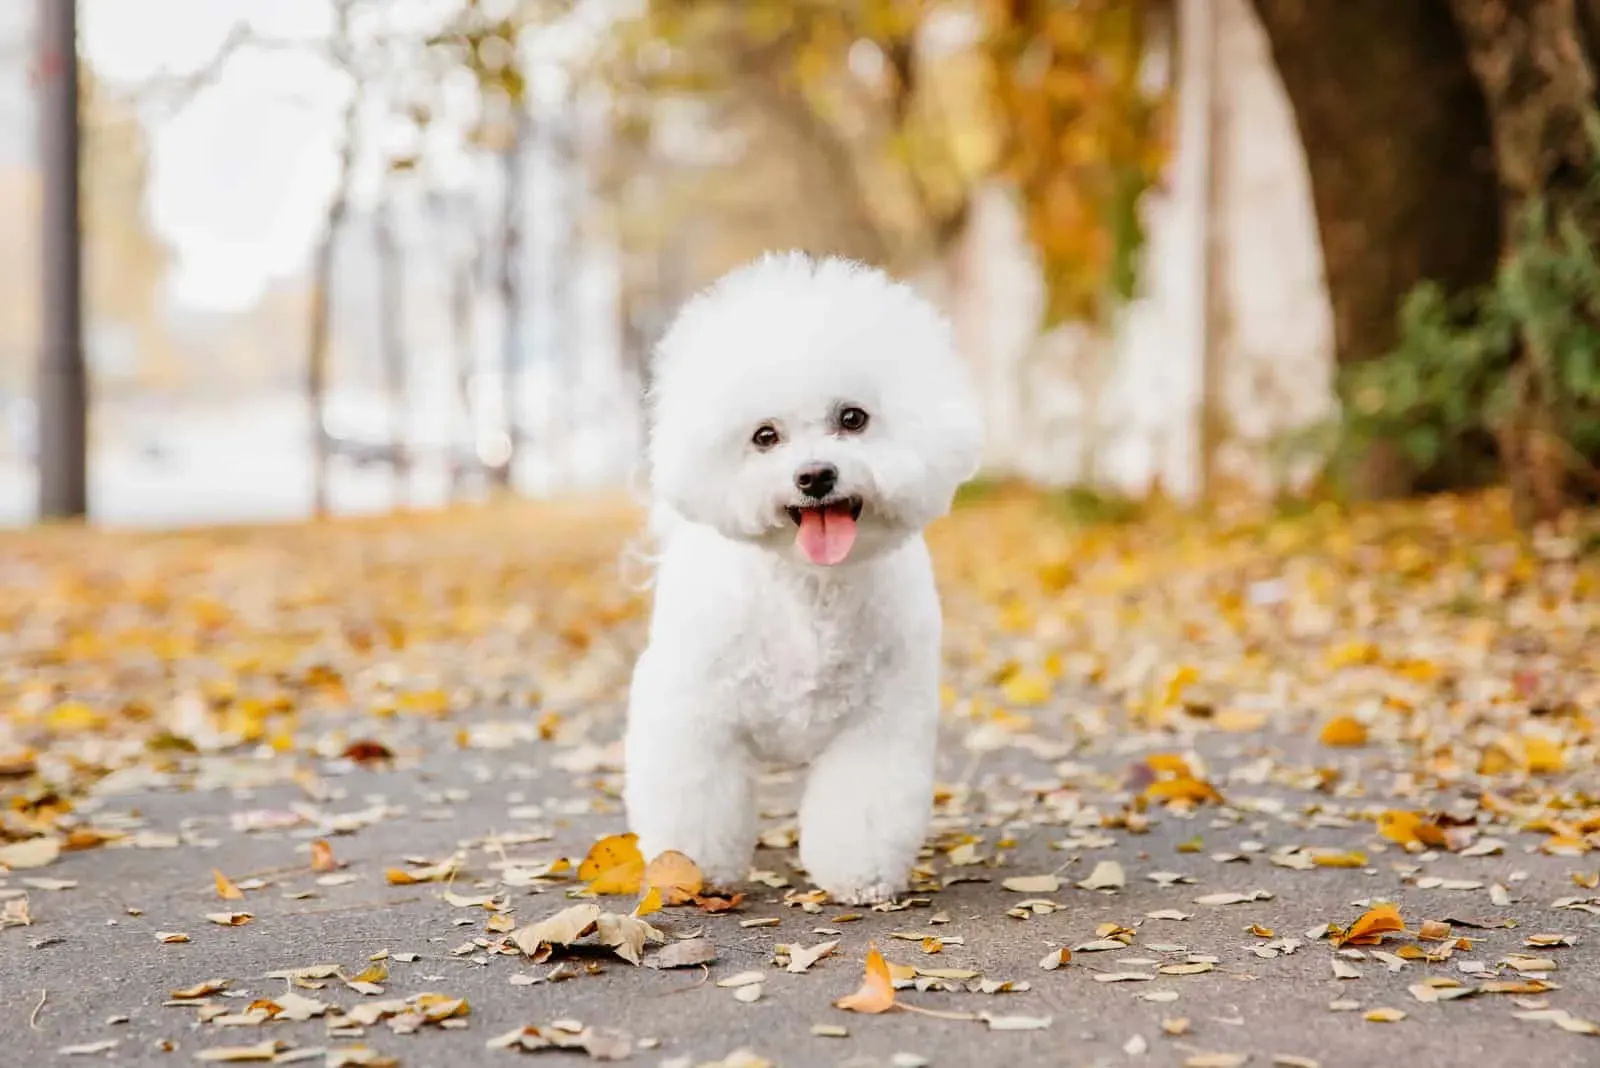 Bichon Frise on road within dry leaf